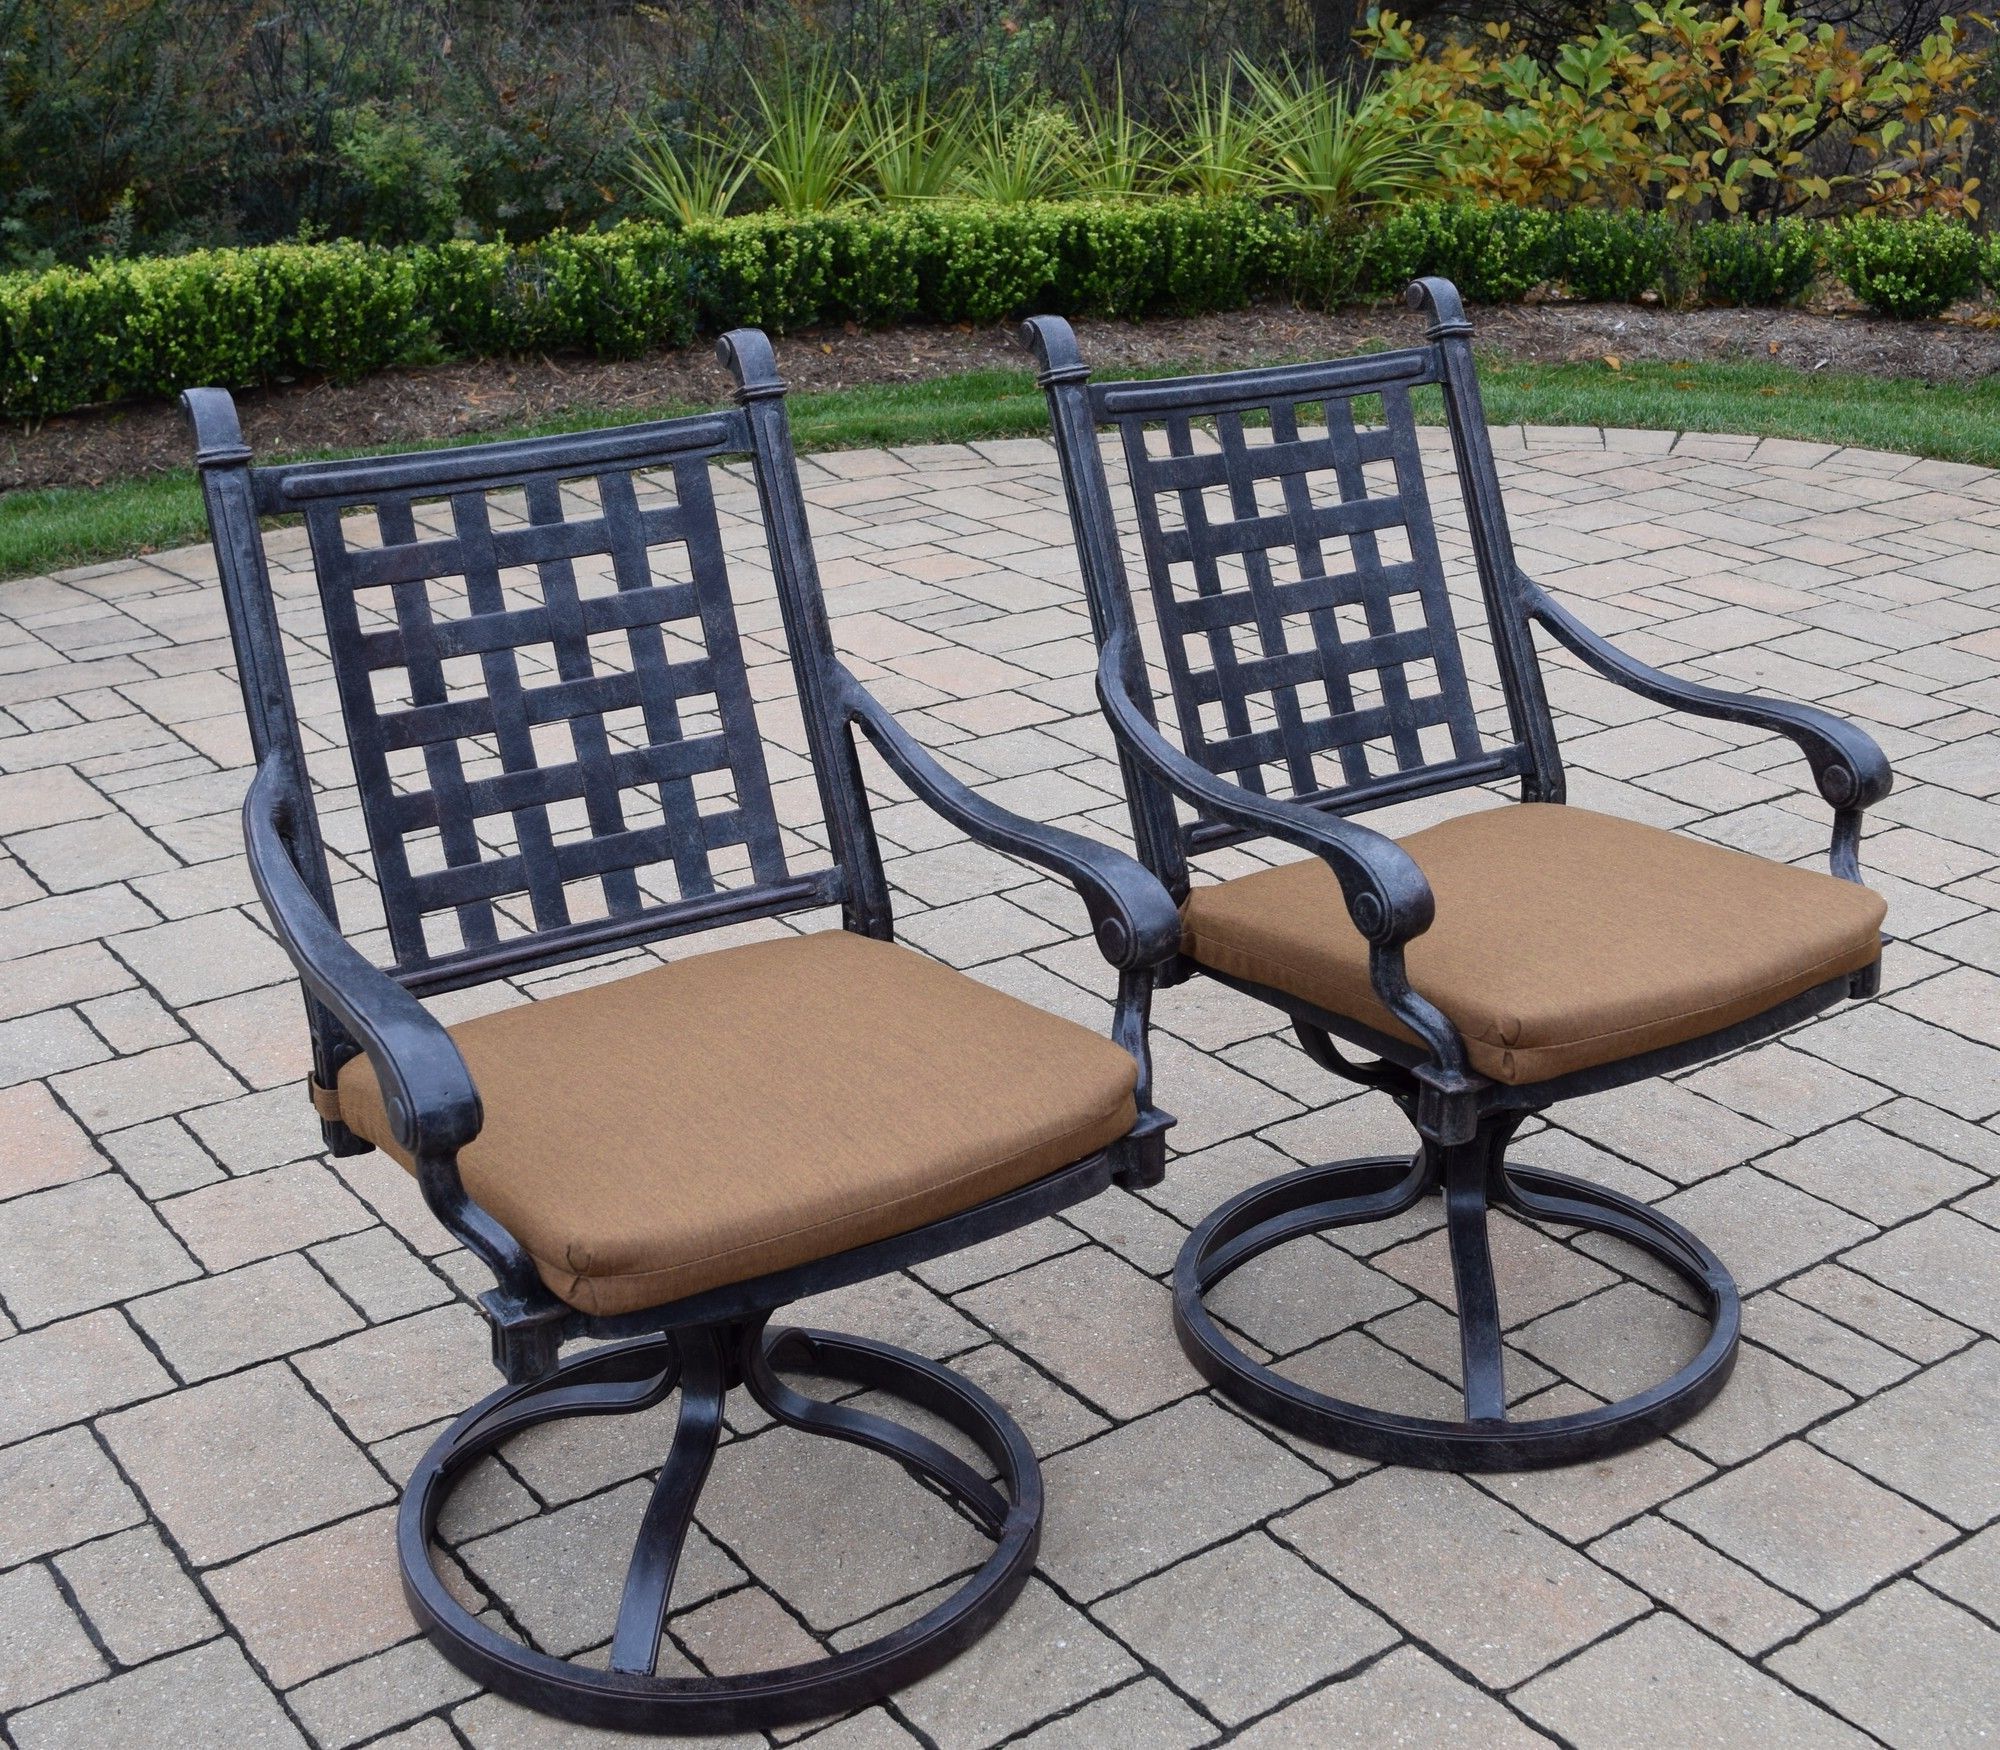 Green Rattan Outdoor Rocking Chair Sets With Regard To Current Belmont Aluminum Swivel Rocker Dining Chair With Cushion (View 11 of 15)